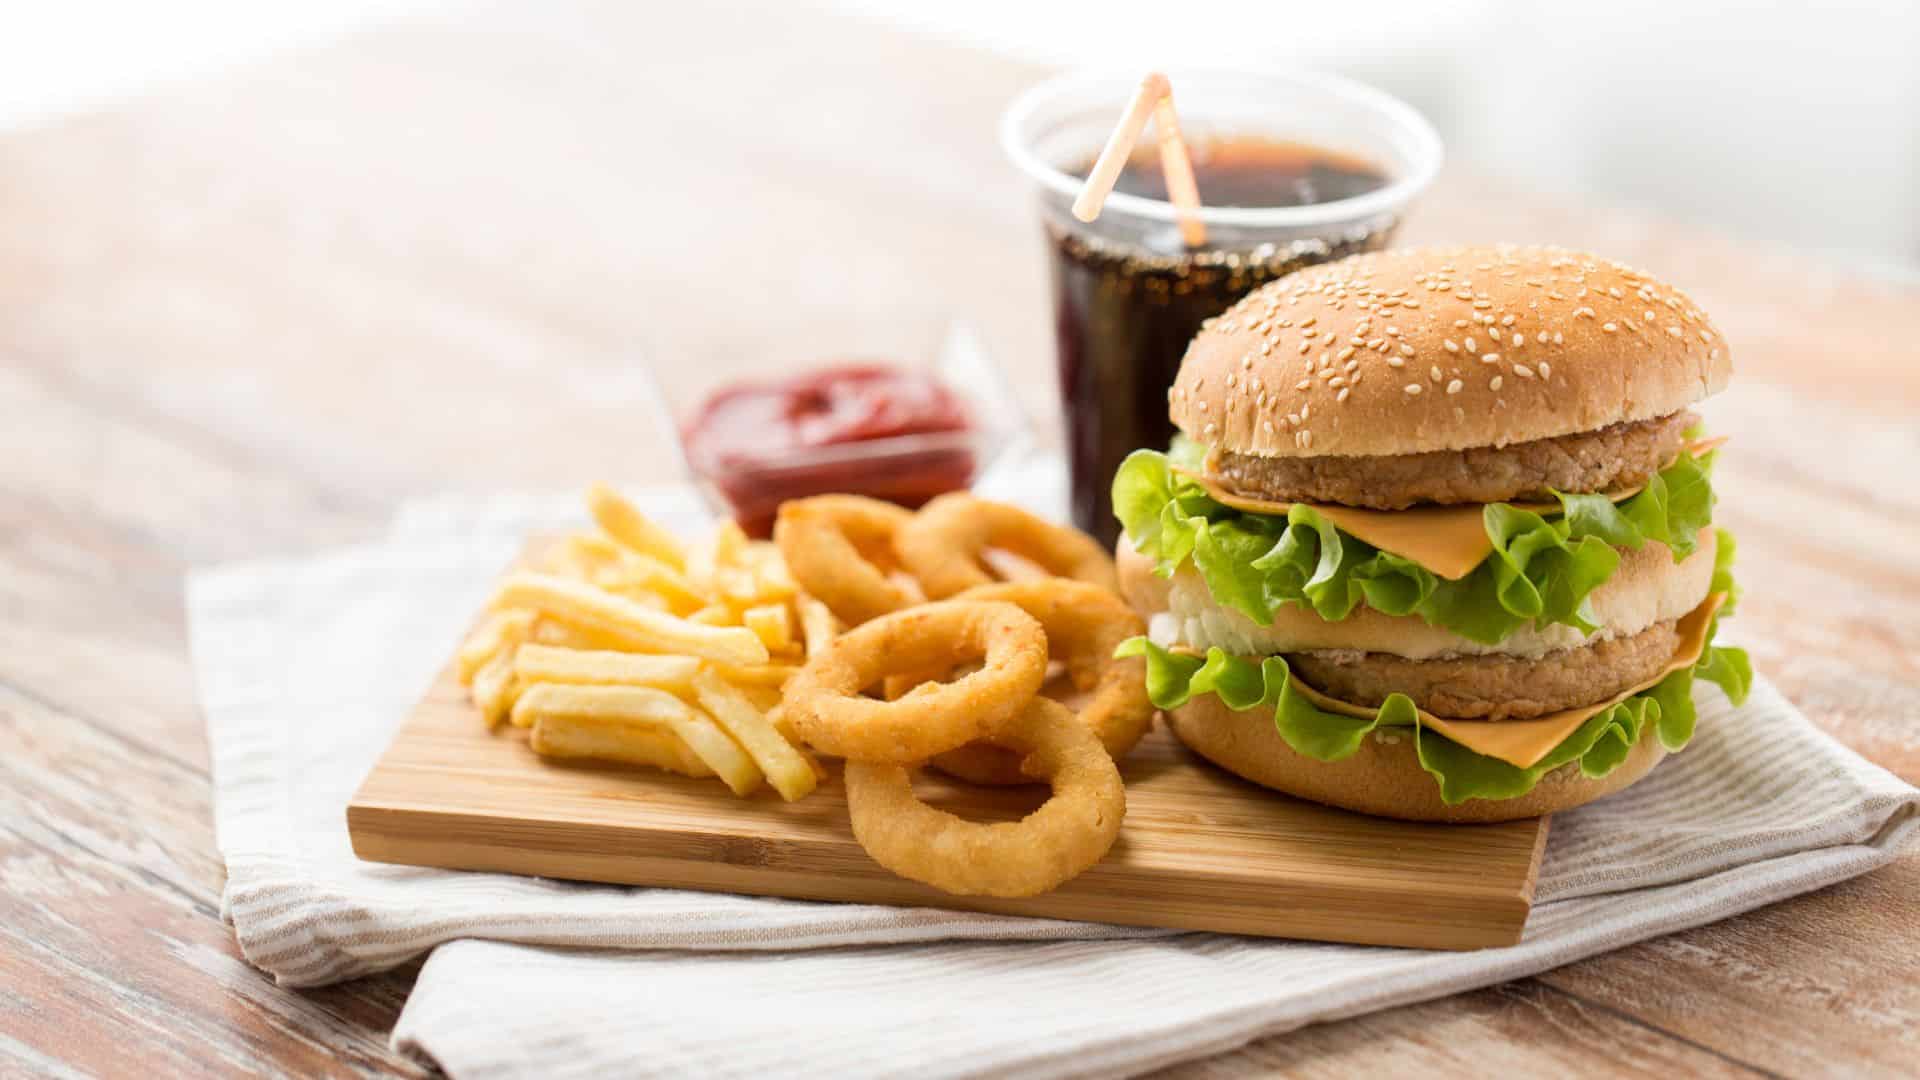 <p>Keep eating that fast food you love so much and you may start to see some serious effects. Eating a lot of fast food may just make you dumber. Take a look at these 19 reasons why fast food may be ruining your intelligence. You may never go through that drive-through ever again! </p> <p><em>Note: The content of this article does not reflect the Writer's personal beliefs.</em></p>